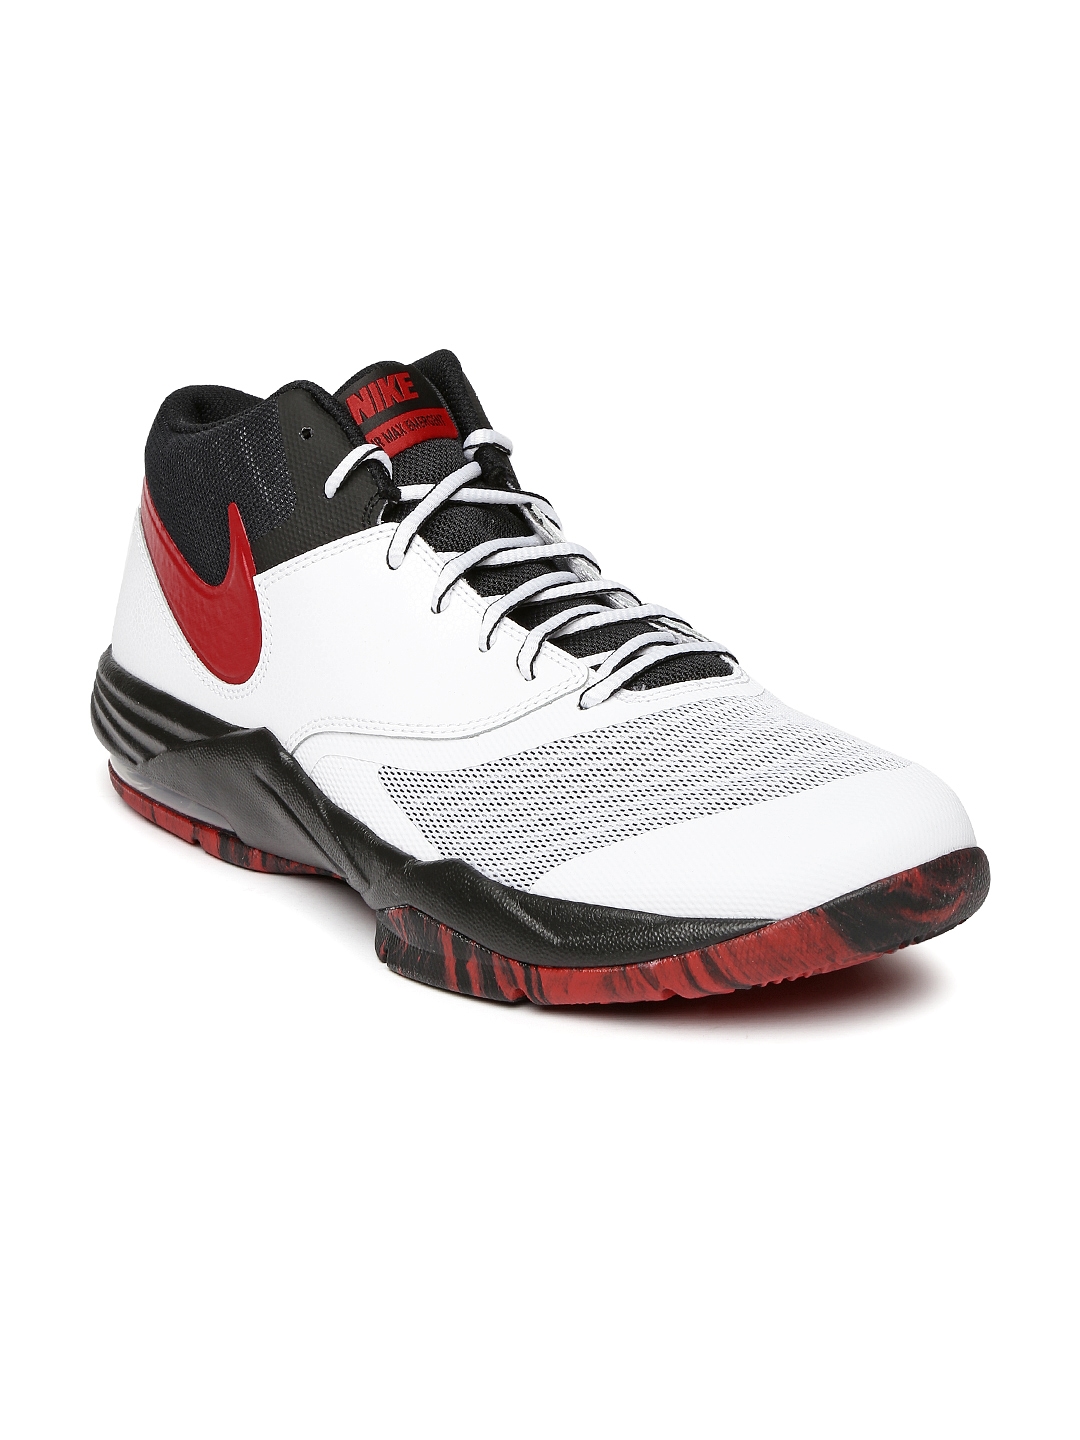 air max emergent red basketball shoes